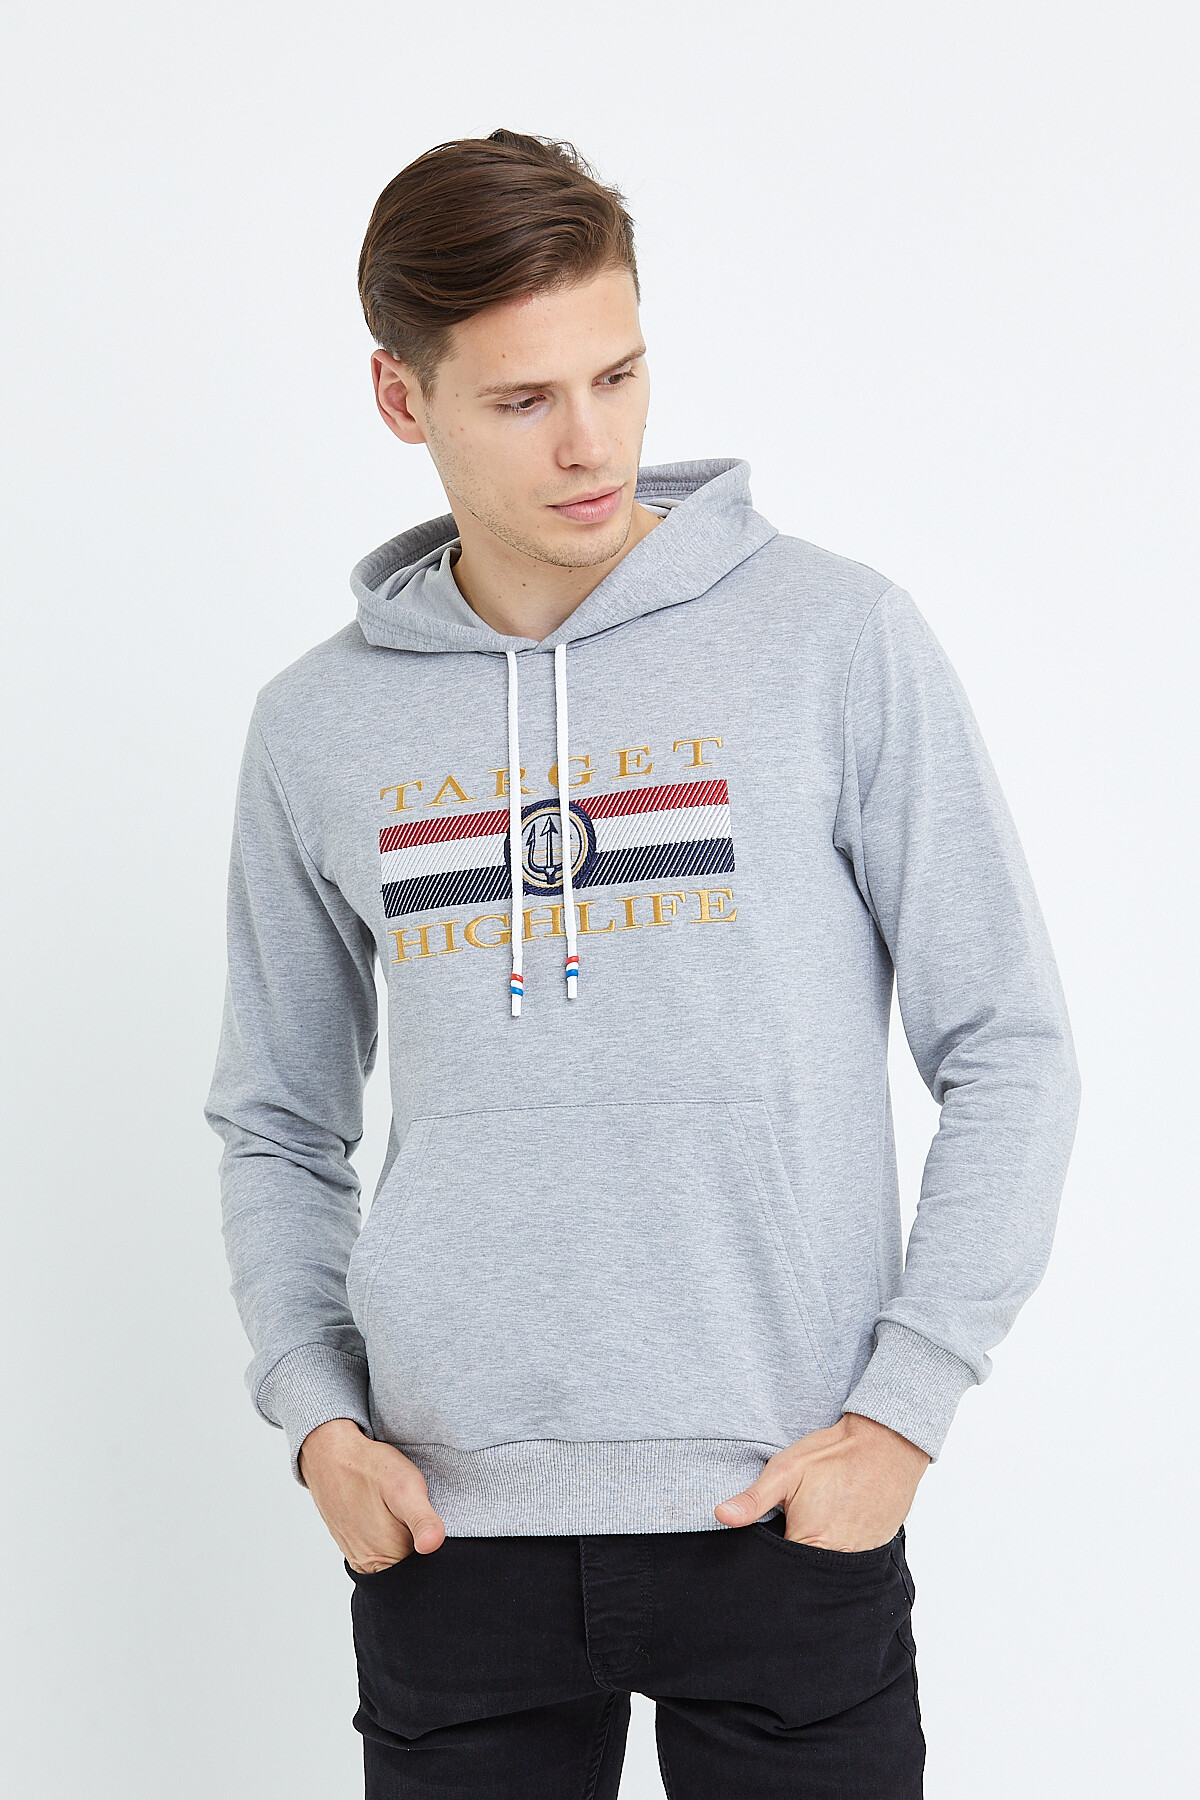 Hoodie - ByComeor - Wholesale Products